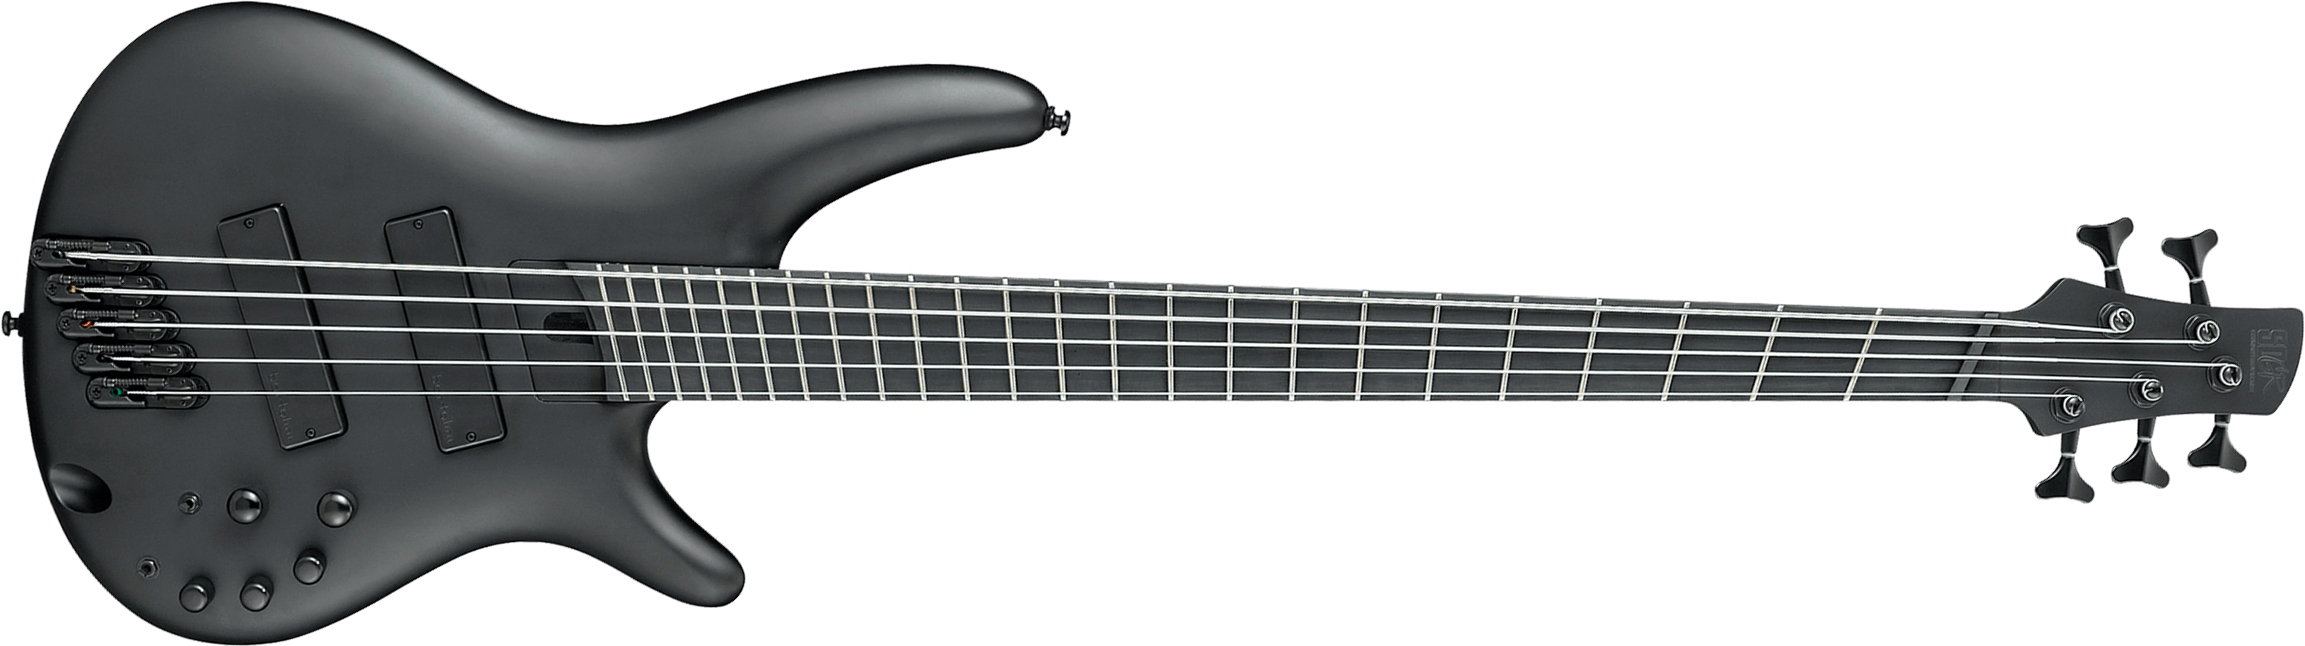 Ibanez Srms625ex Bkf Iron Label 5c Active Bartolini Ebo - Black Flat - Solid body electric bass - Main picture